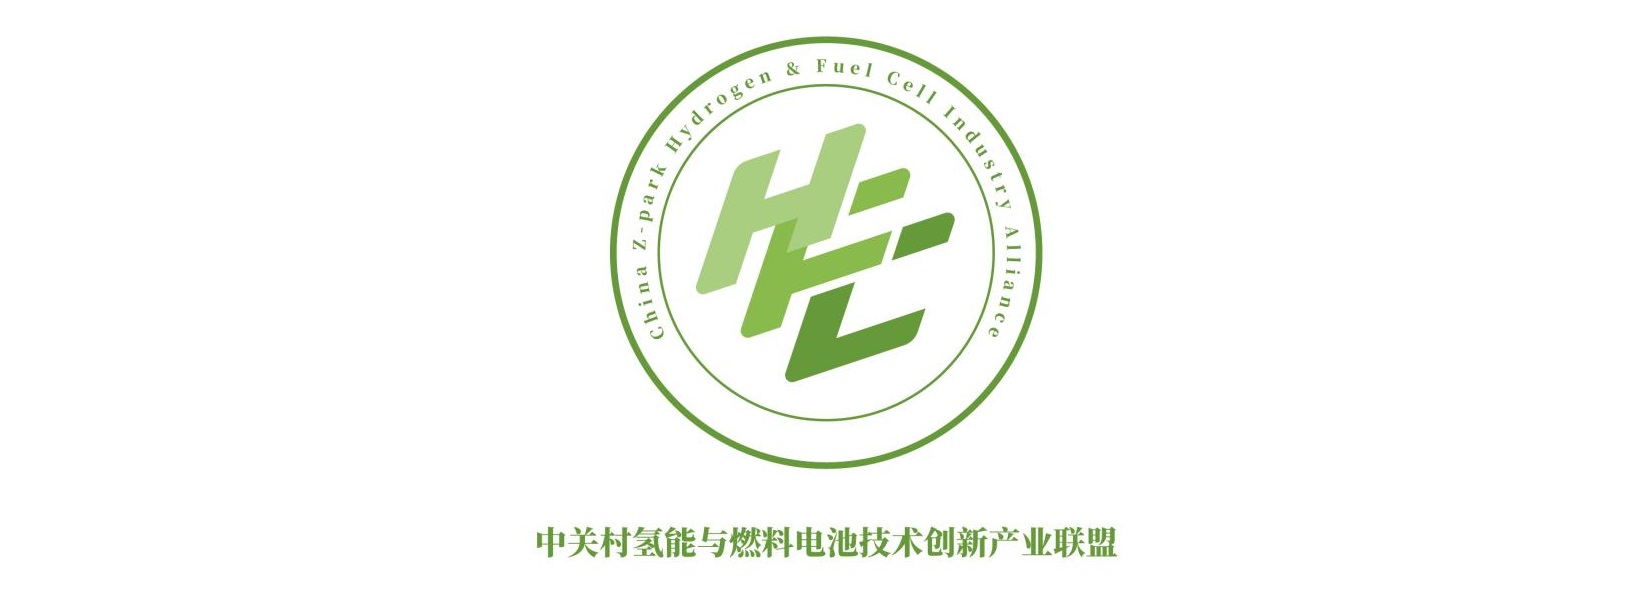 China Z-Park Hydrogen and Fuel Cell Industry Alliance (ZHFCA)